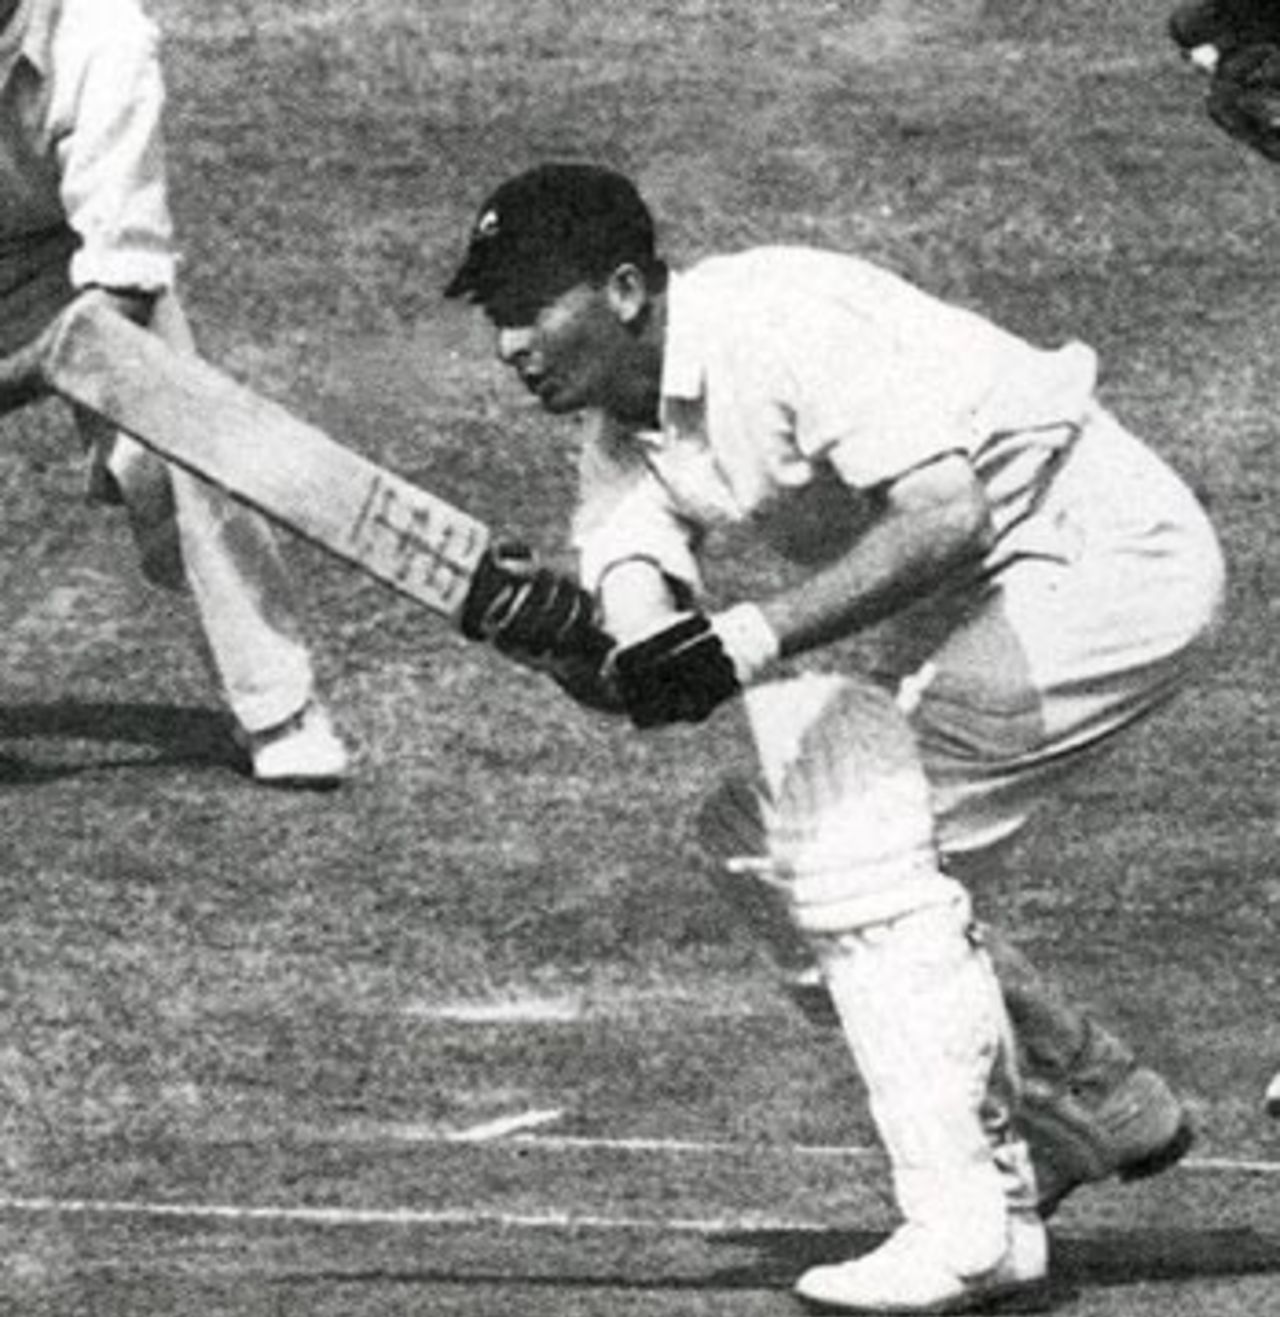 Bruce Mitchell pushes a single to reach his second-innings hundred against England at The Oval - he also made a century in the first, England v SOuth AFrica, 5th Test, The Oval, August 1947